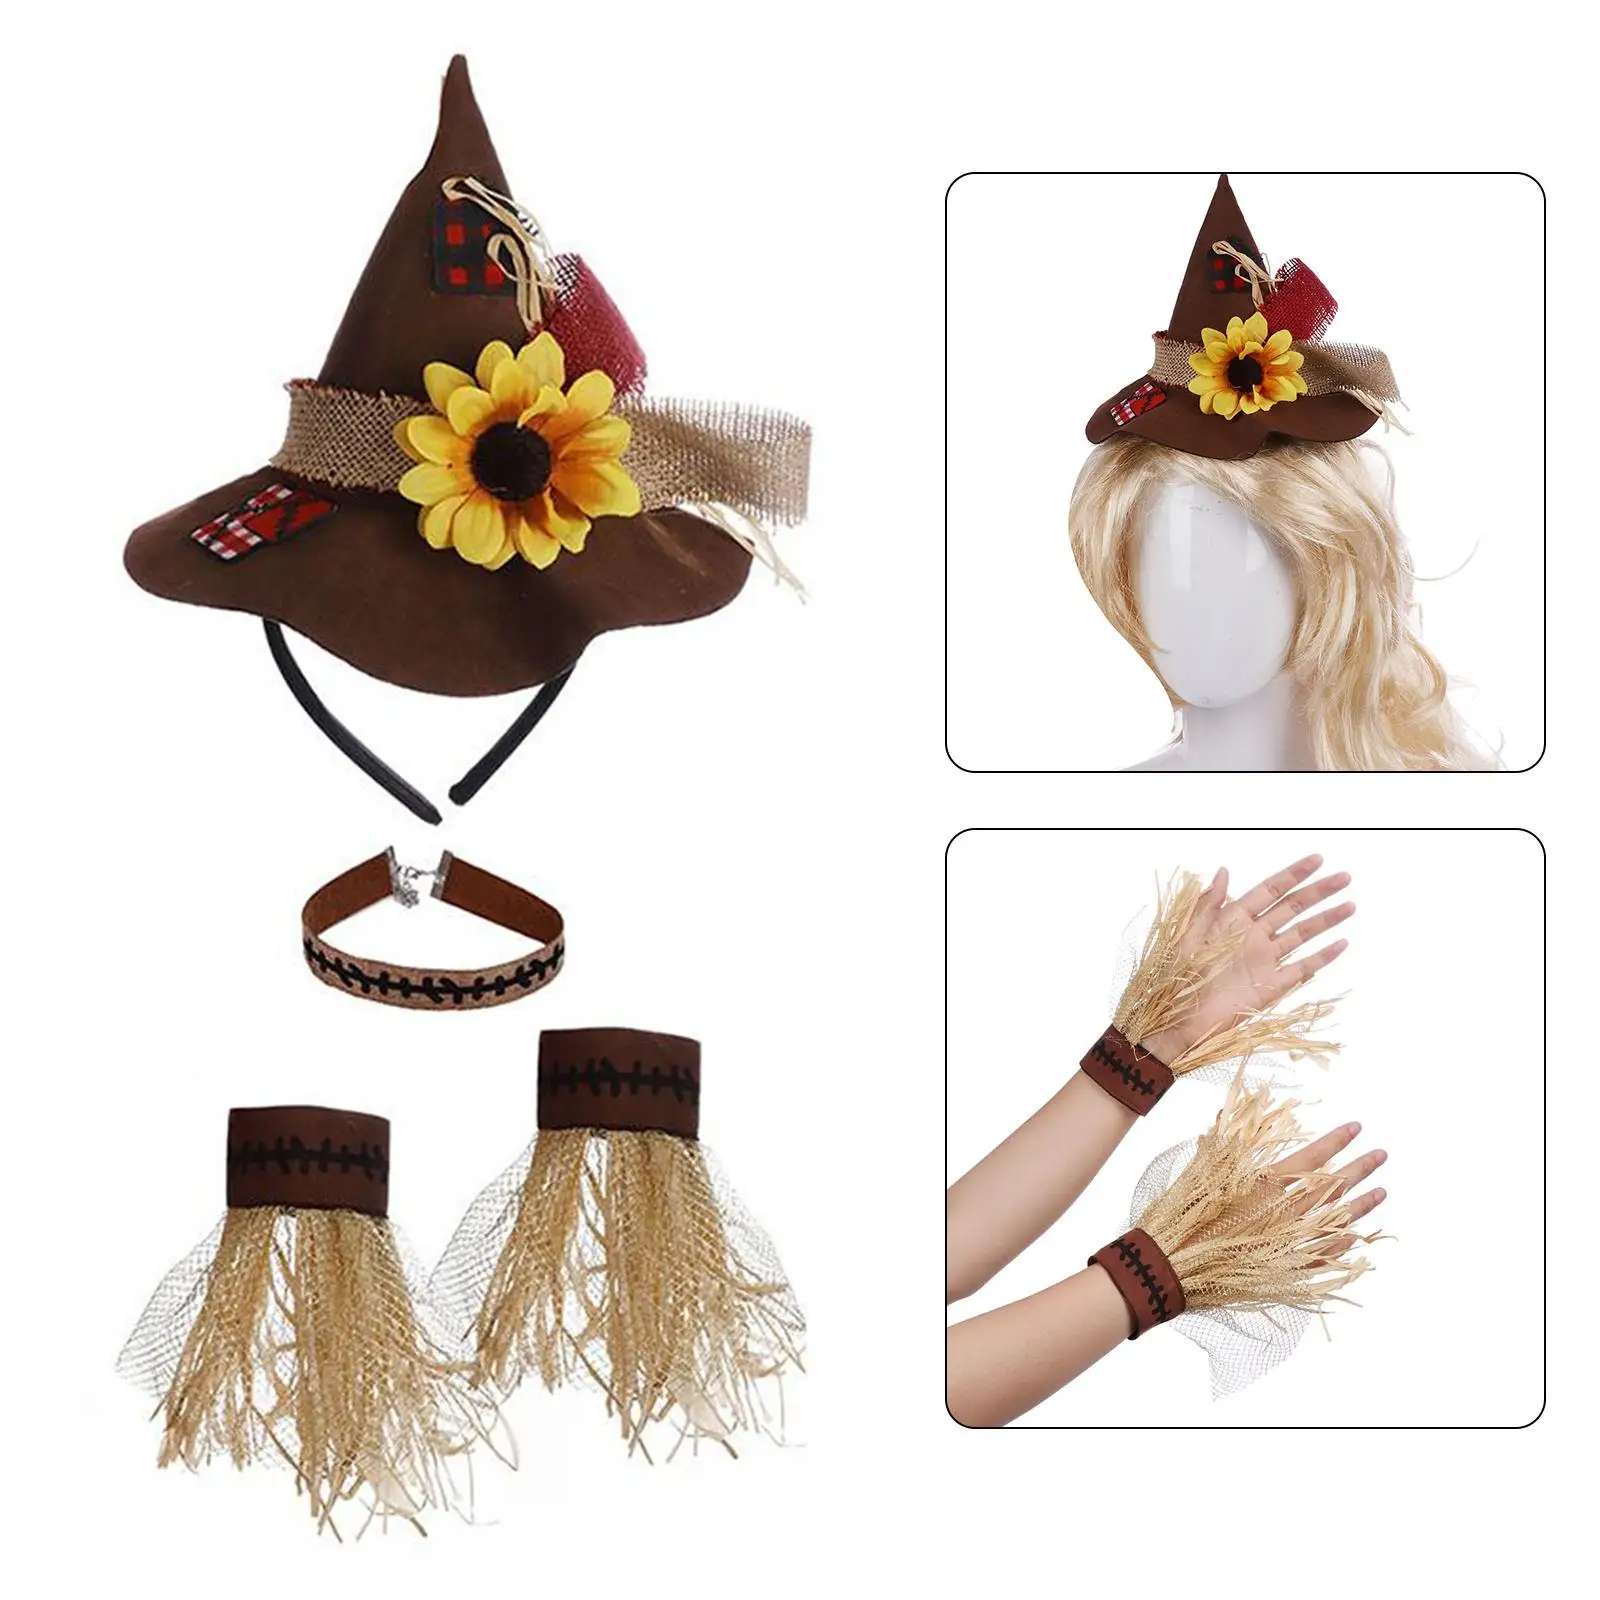 Novelty Halloween Party Costume Hat Necklace Gloves for Cosplay Festival Decoration